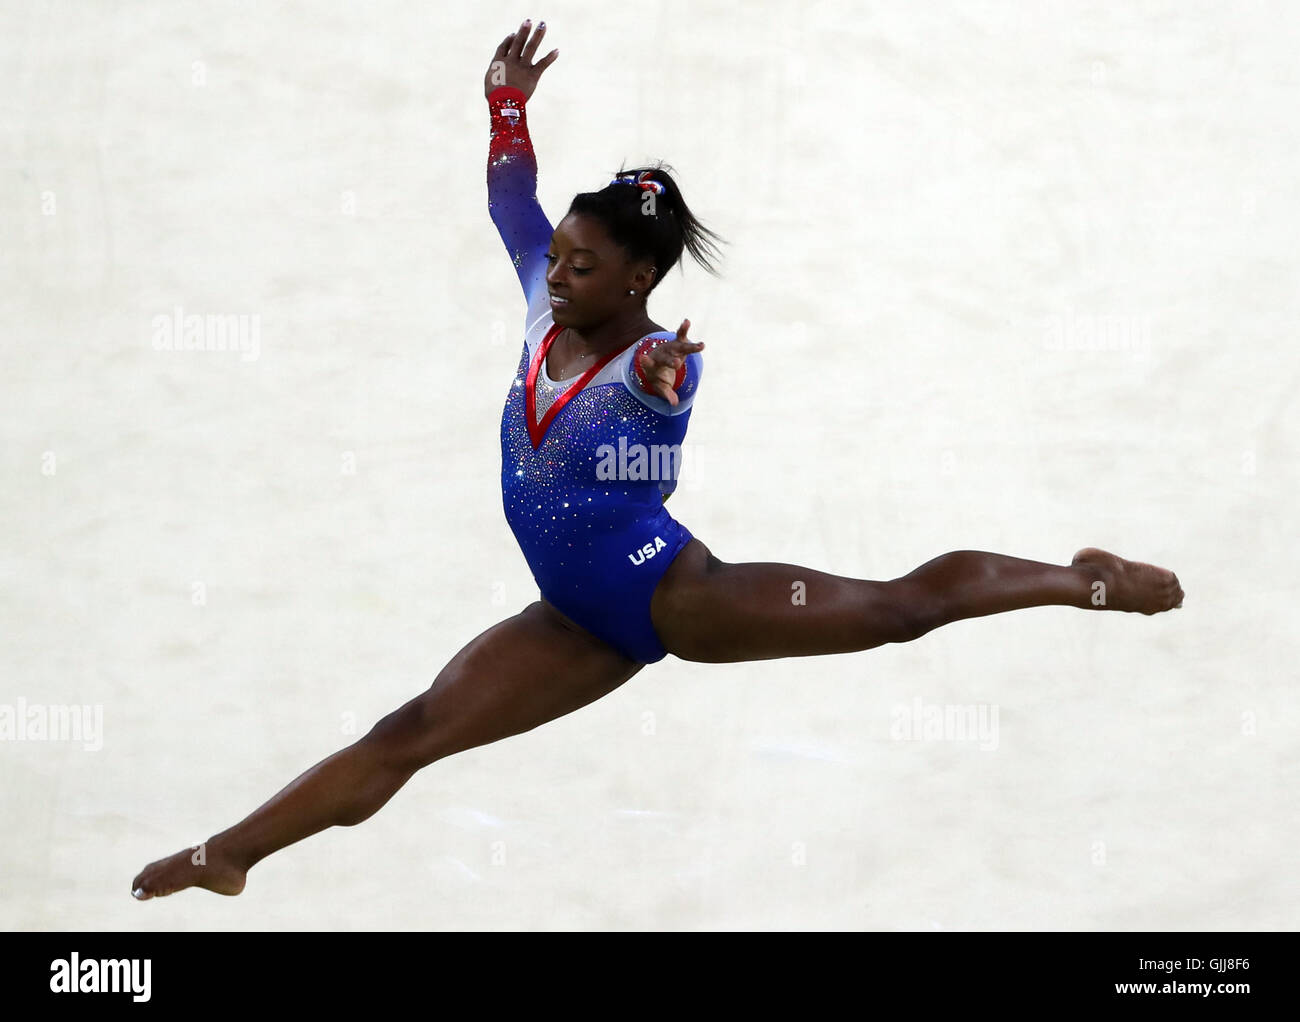 Usas Simone Biles During The Womens Floor Exercise Final At The Rio GJJ8F6 